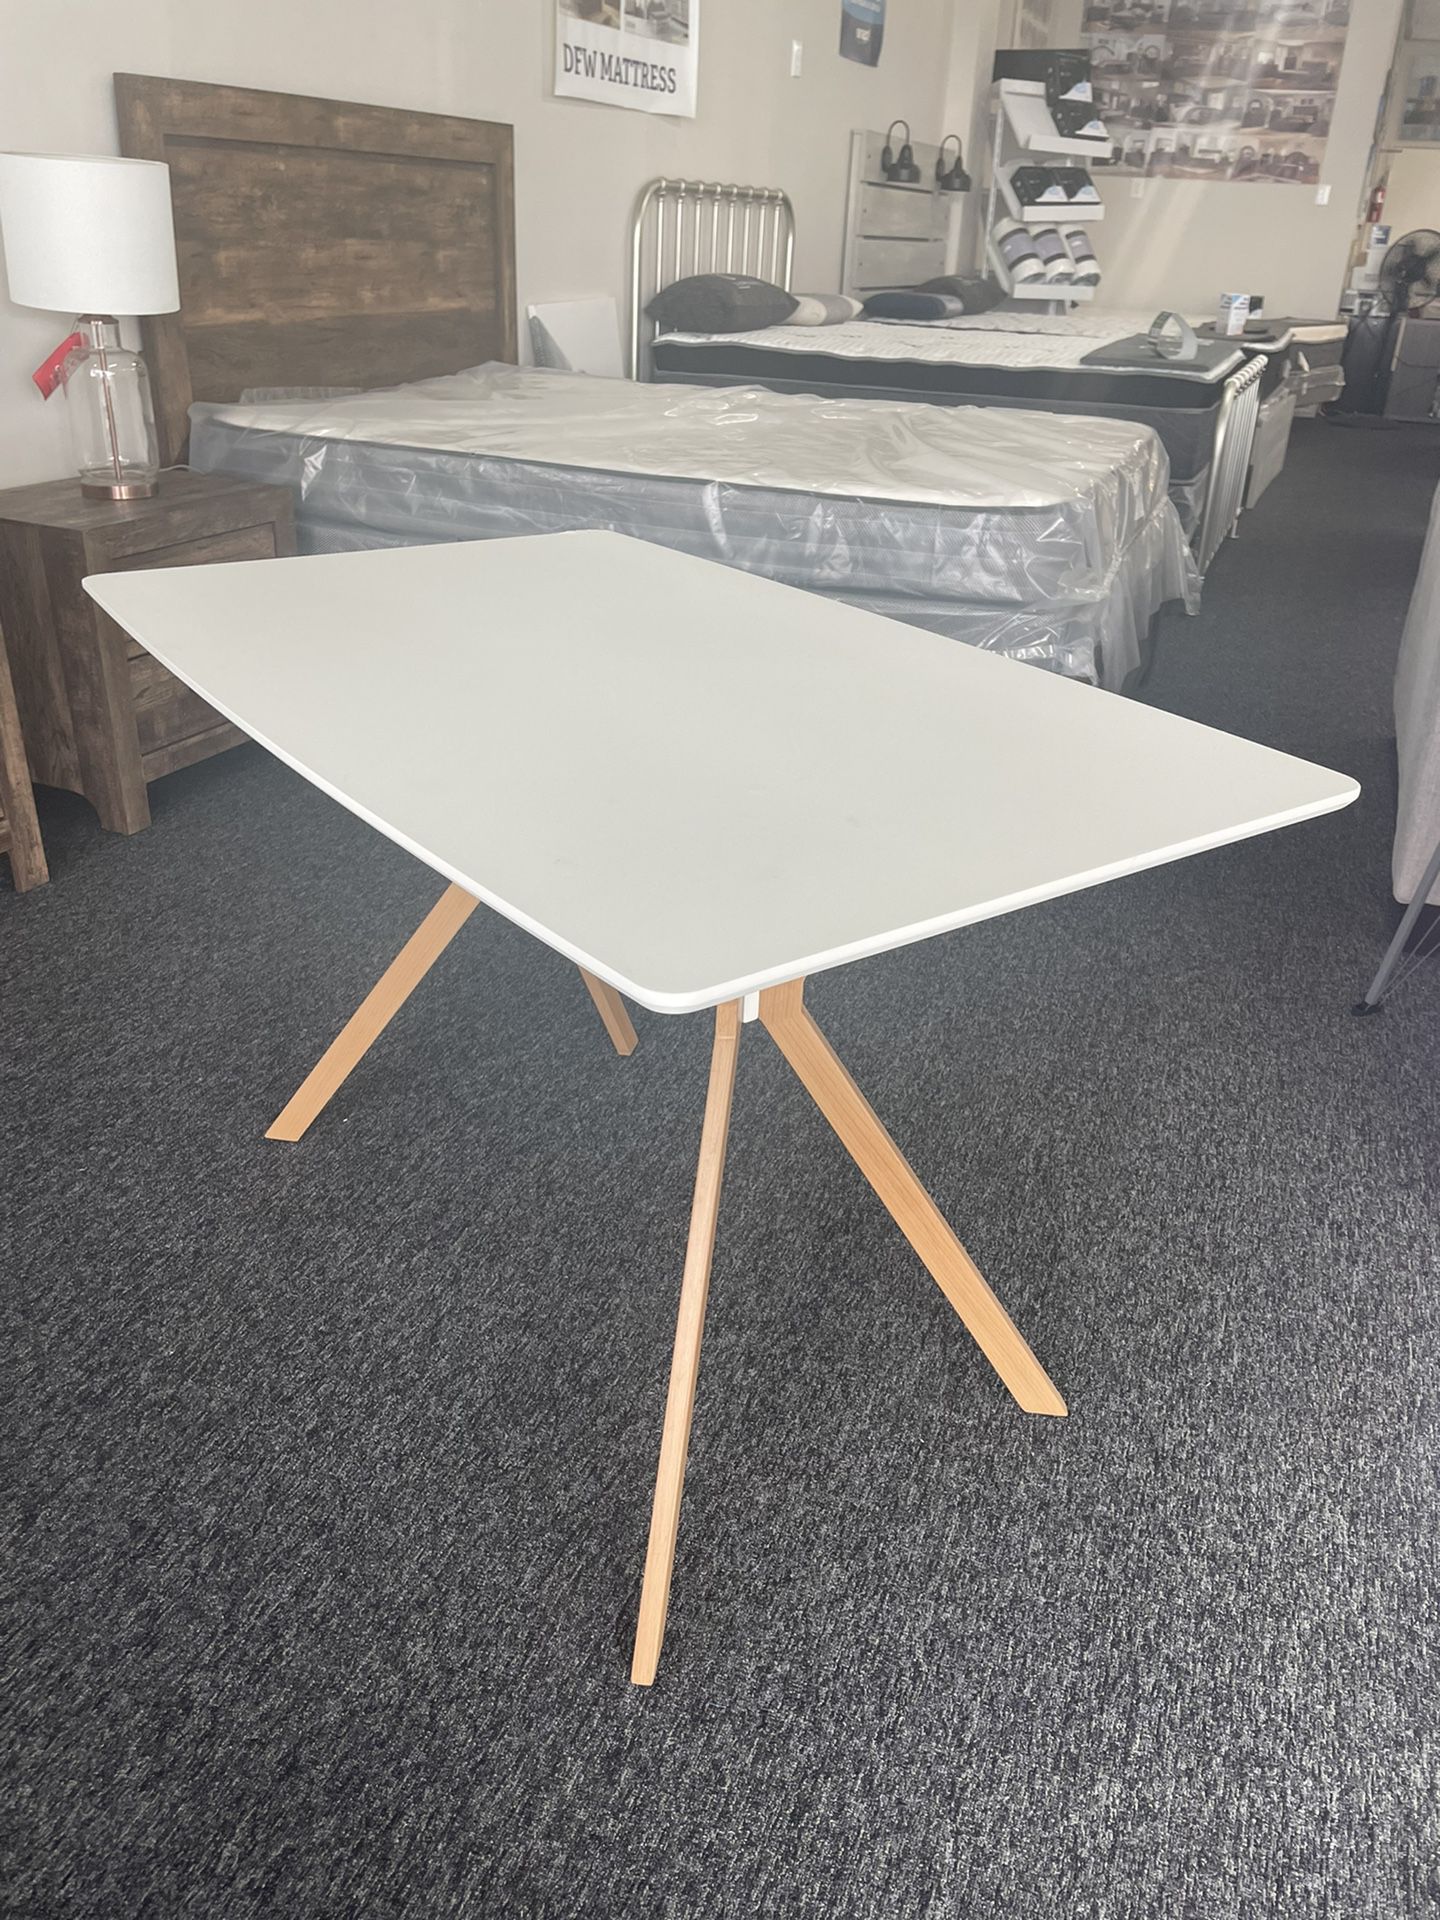 Floor model dining table on clearance with damage